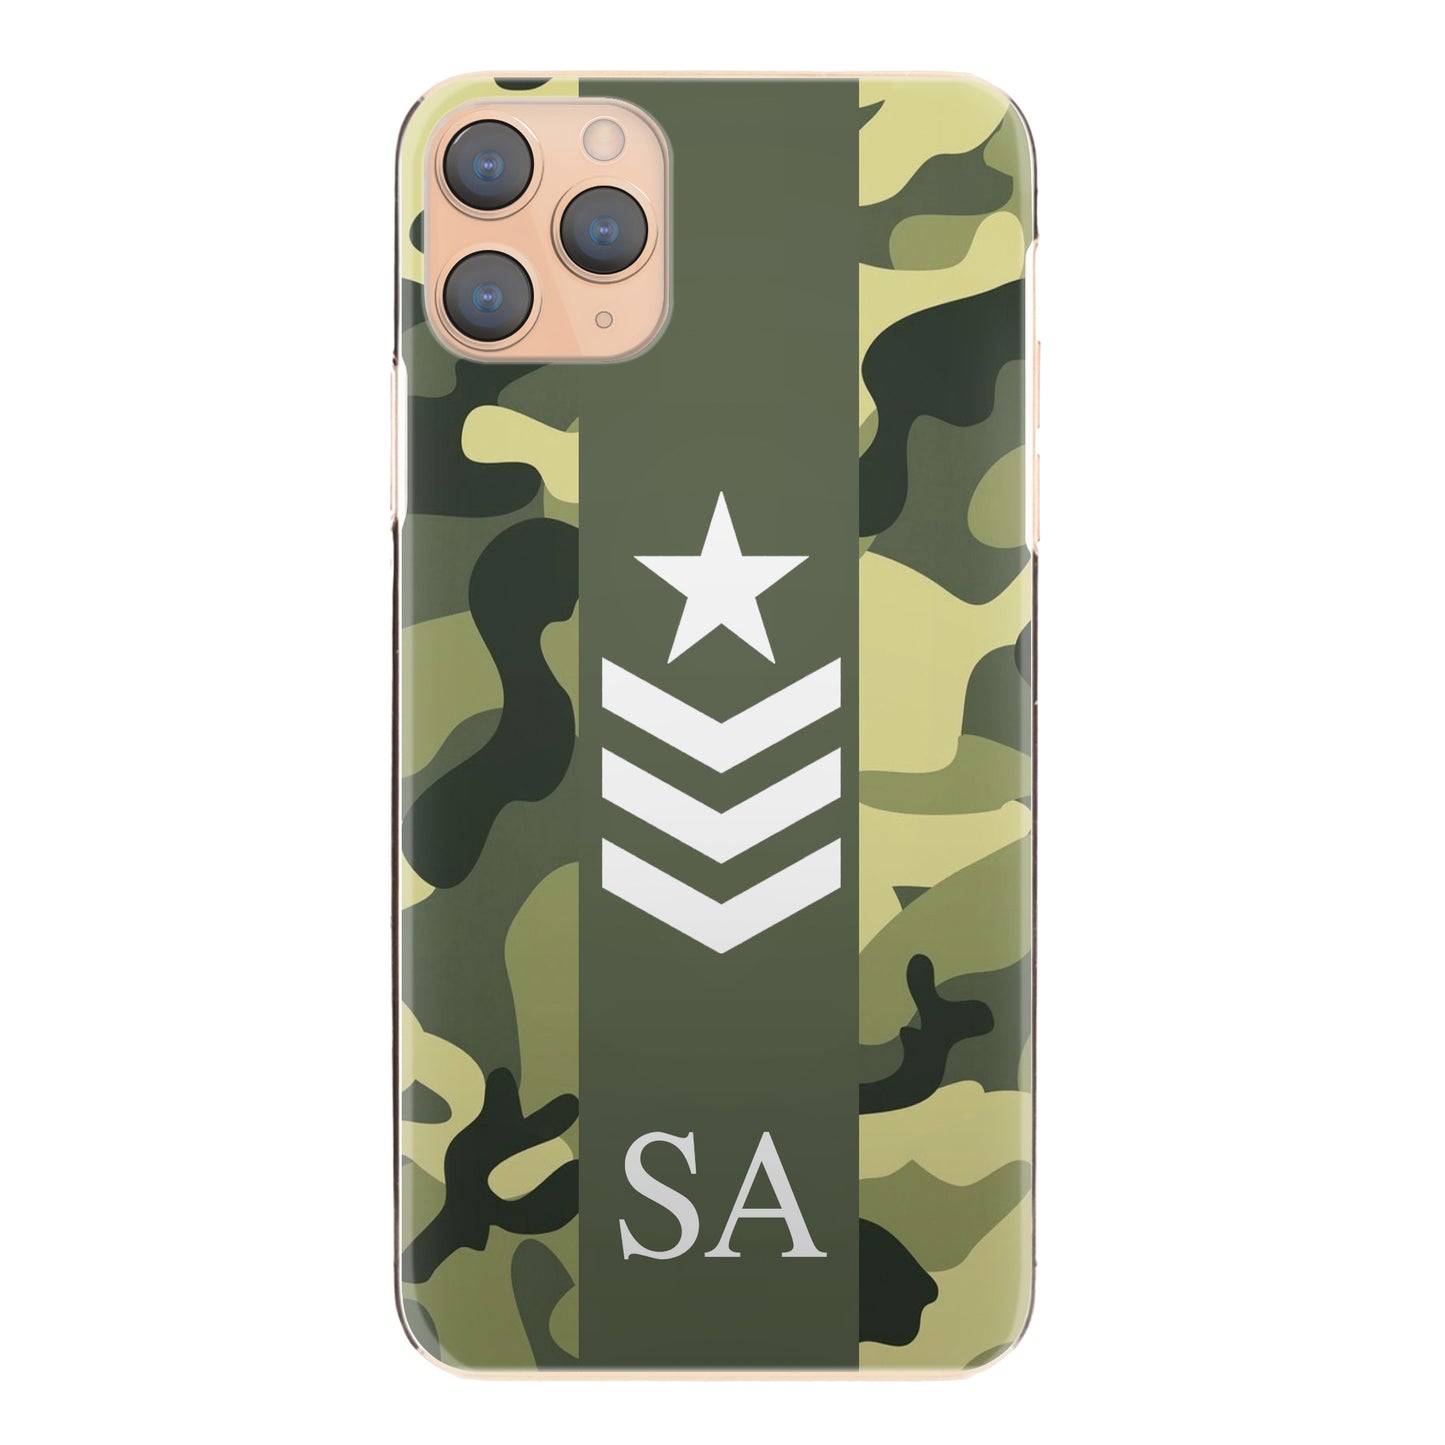 Personalised Apple iPhone Hard Case with Initials and Army Rank on Classic Green Camo